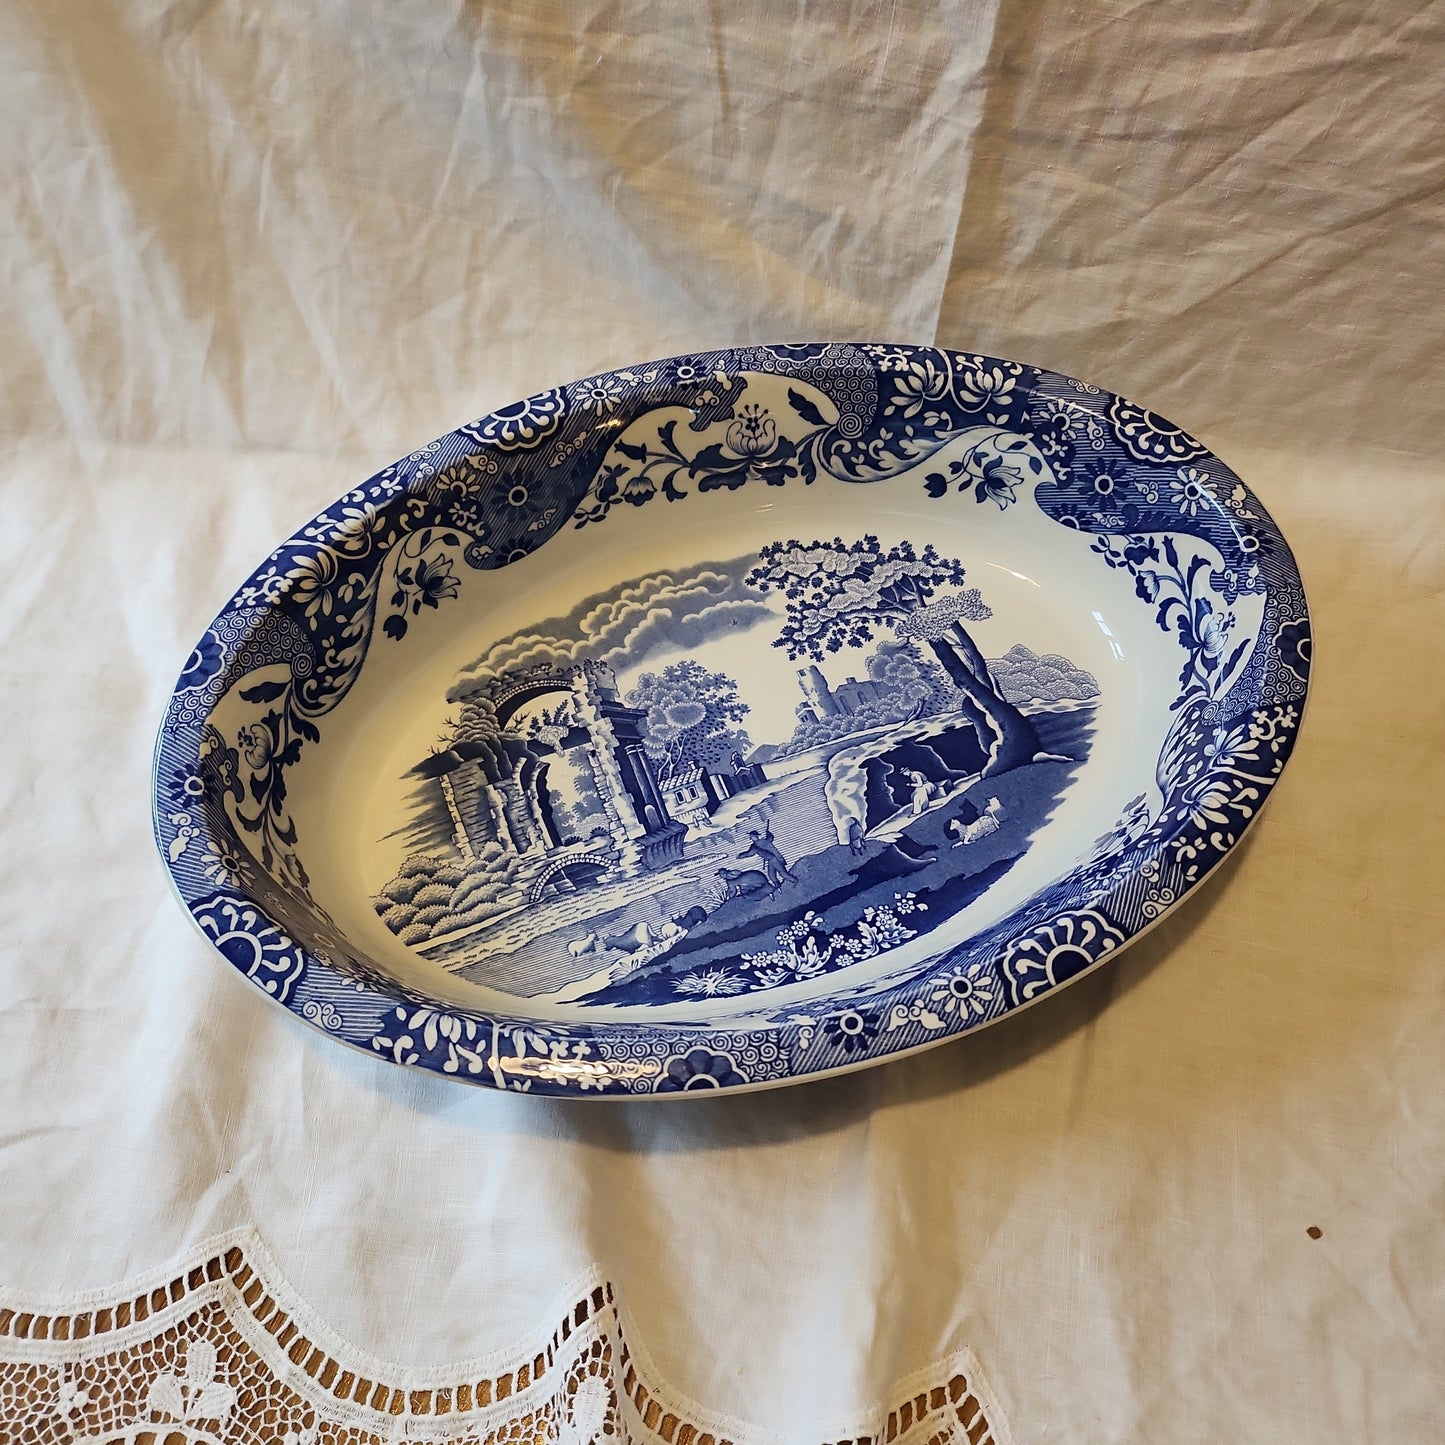 Rare Spode Imperial cookware oven to table oval serving dish